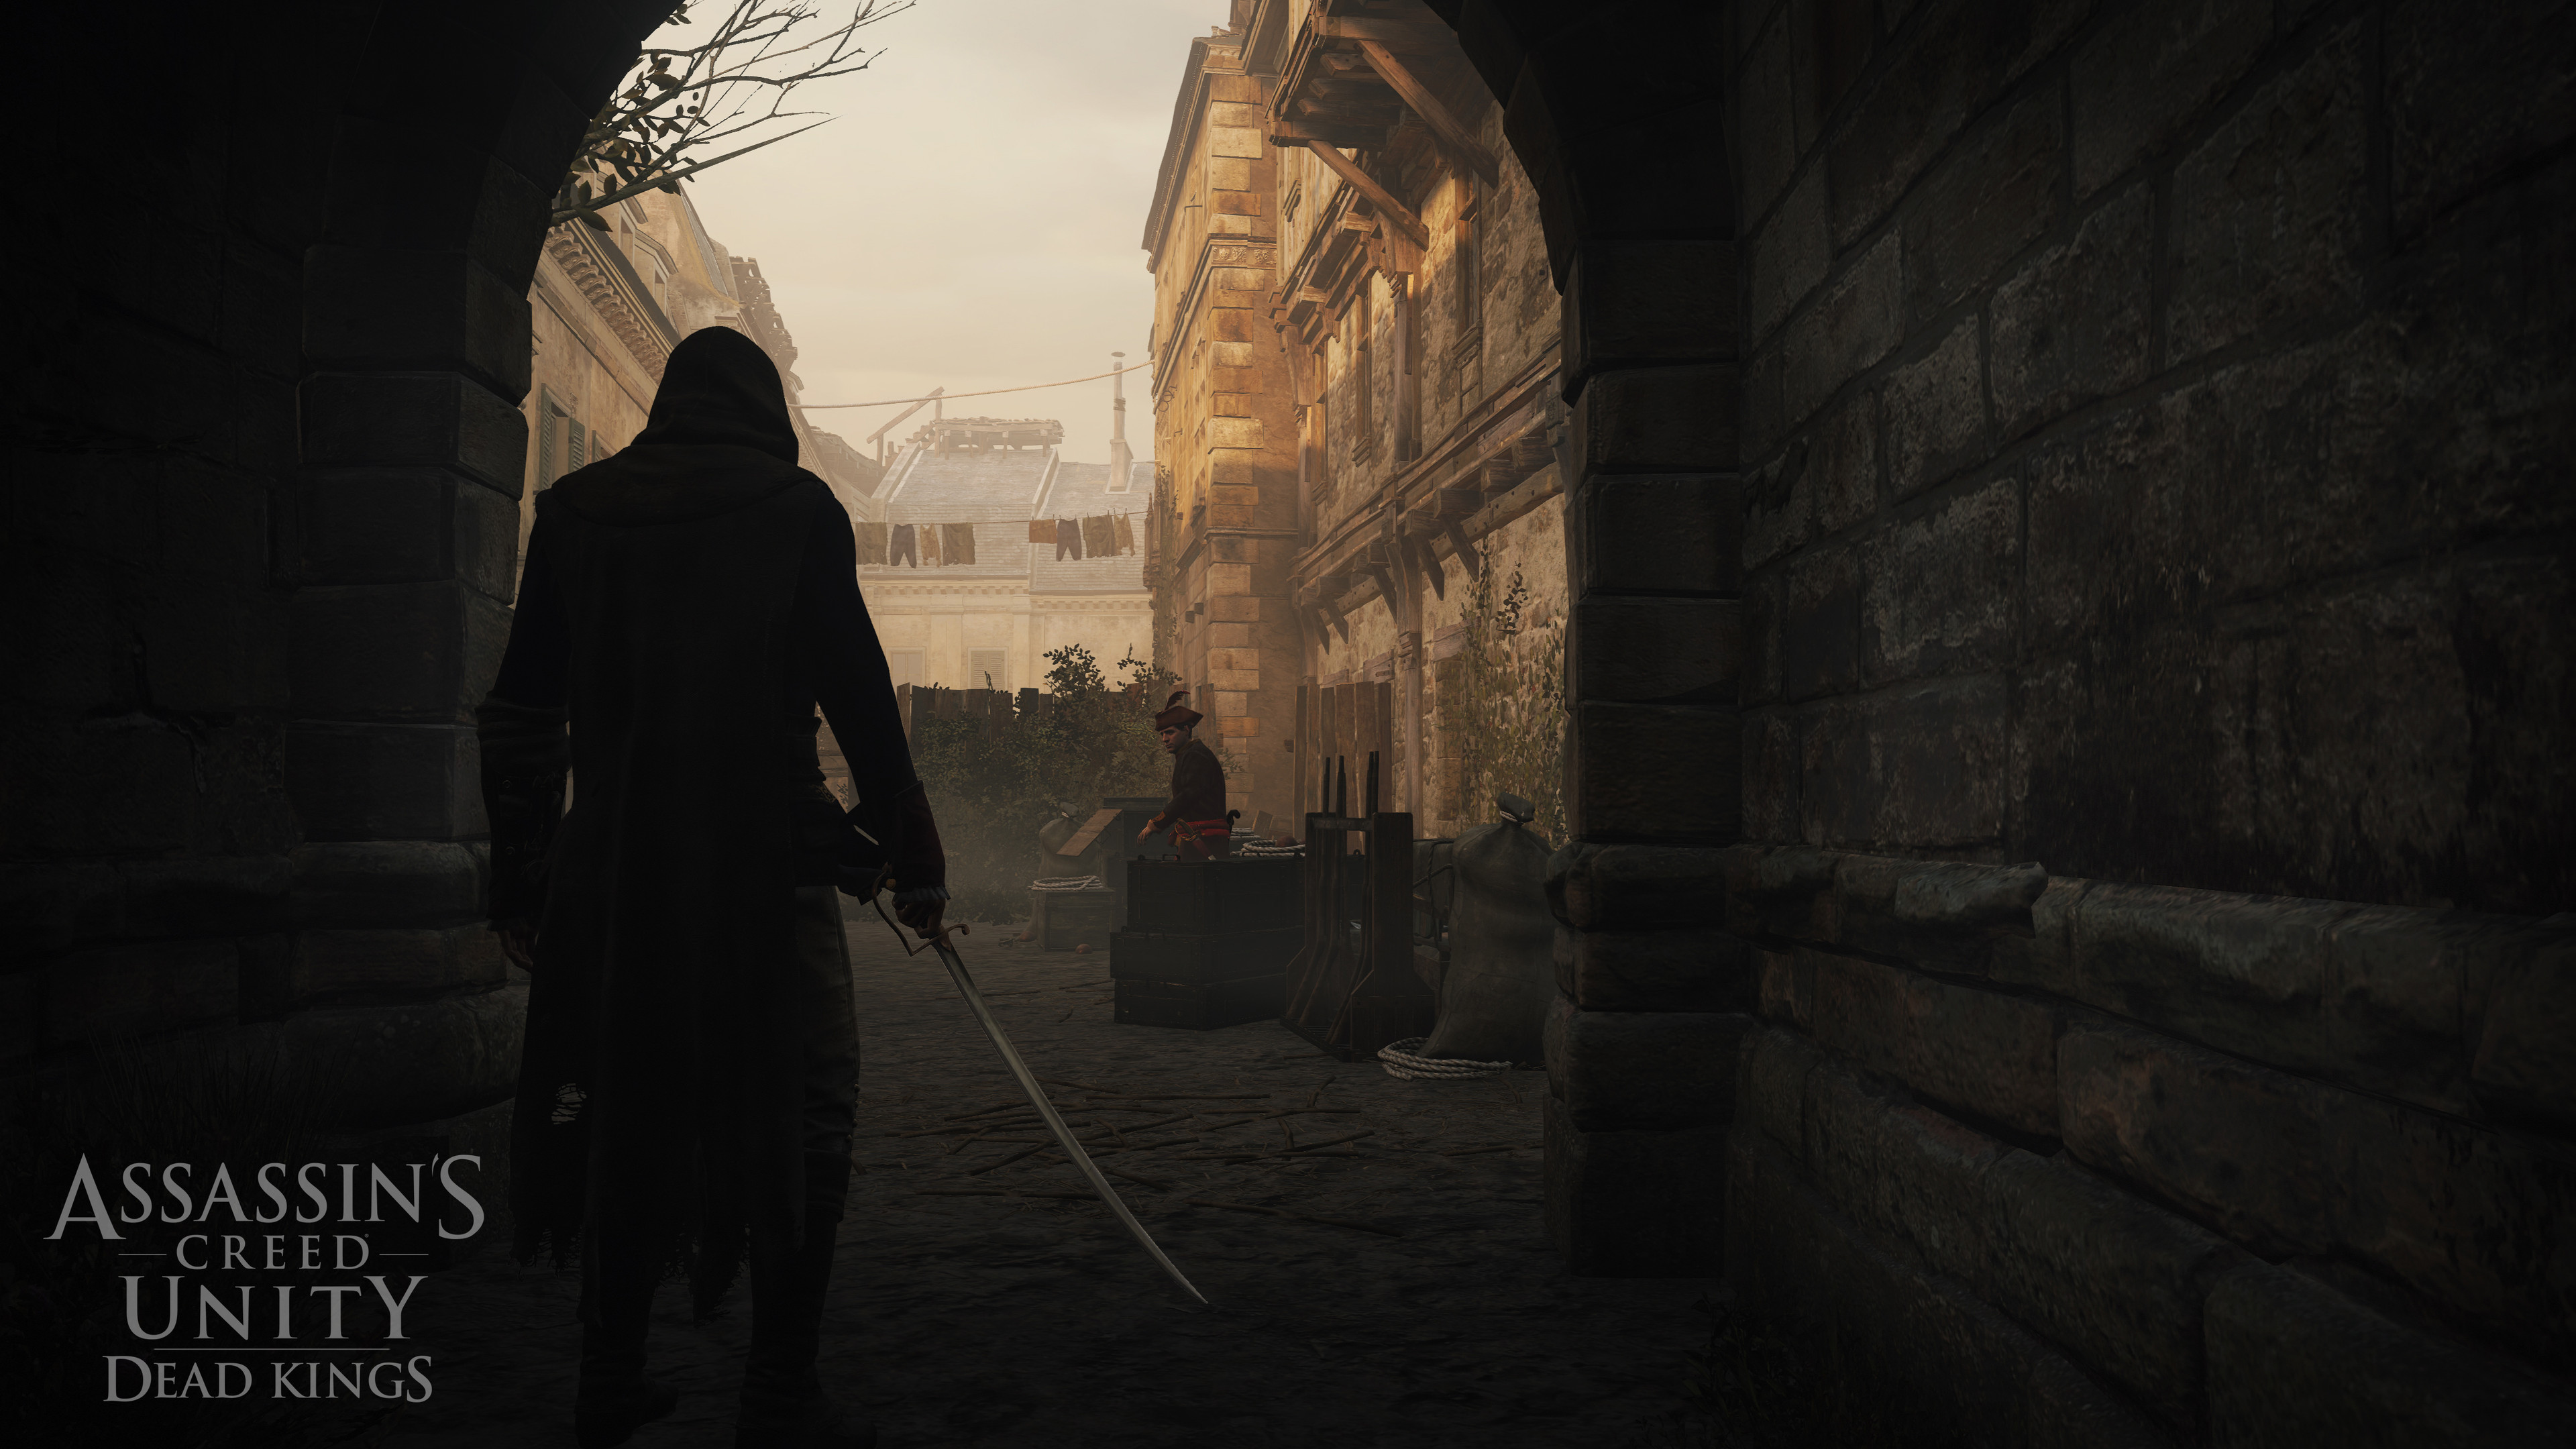 New Artwork for Assassin's Creed Unity: Dead Kings - The Koalition